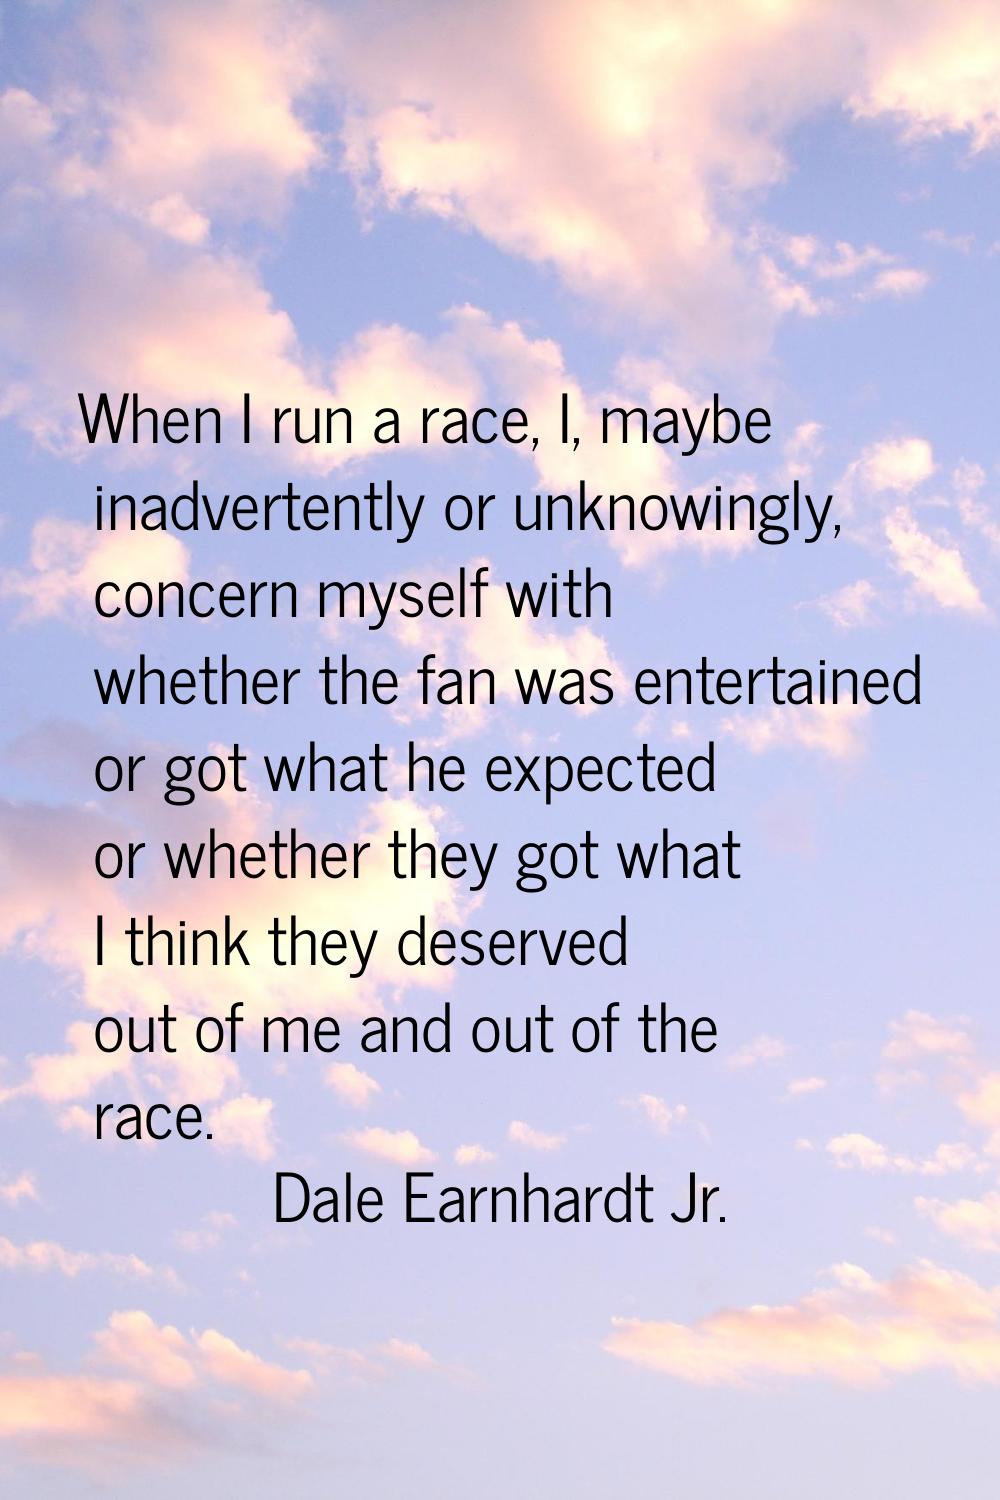 When I run a race, I, maybe inadvertently or unknowingly, concern myself with whether the fan was e